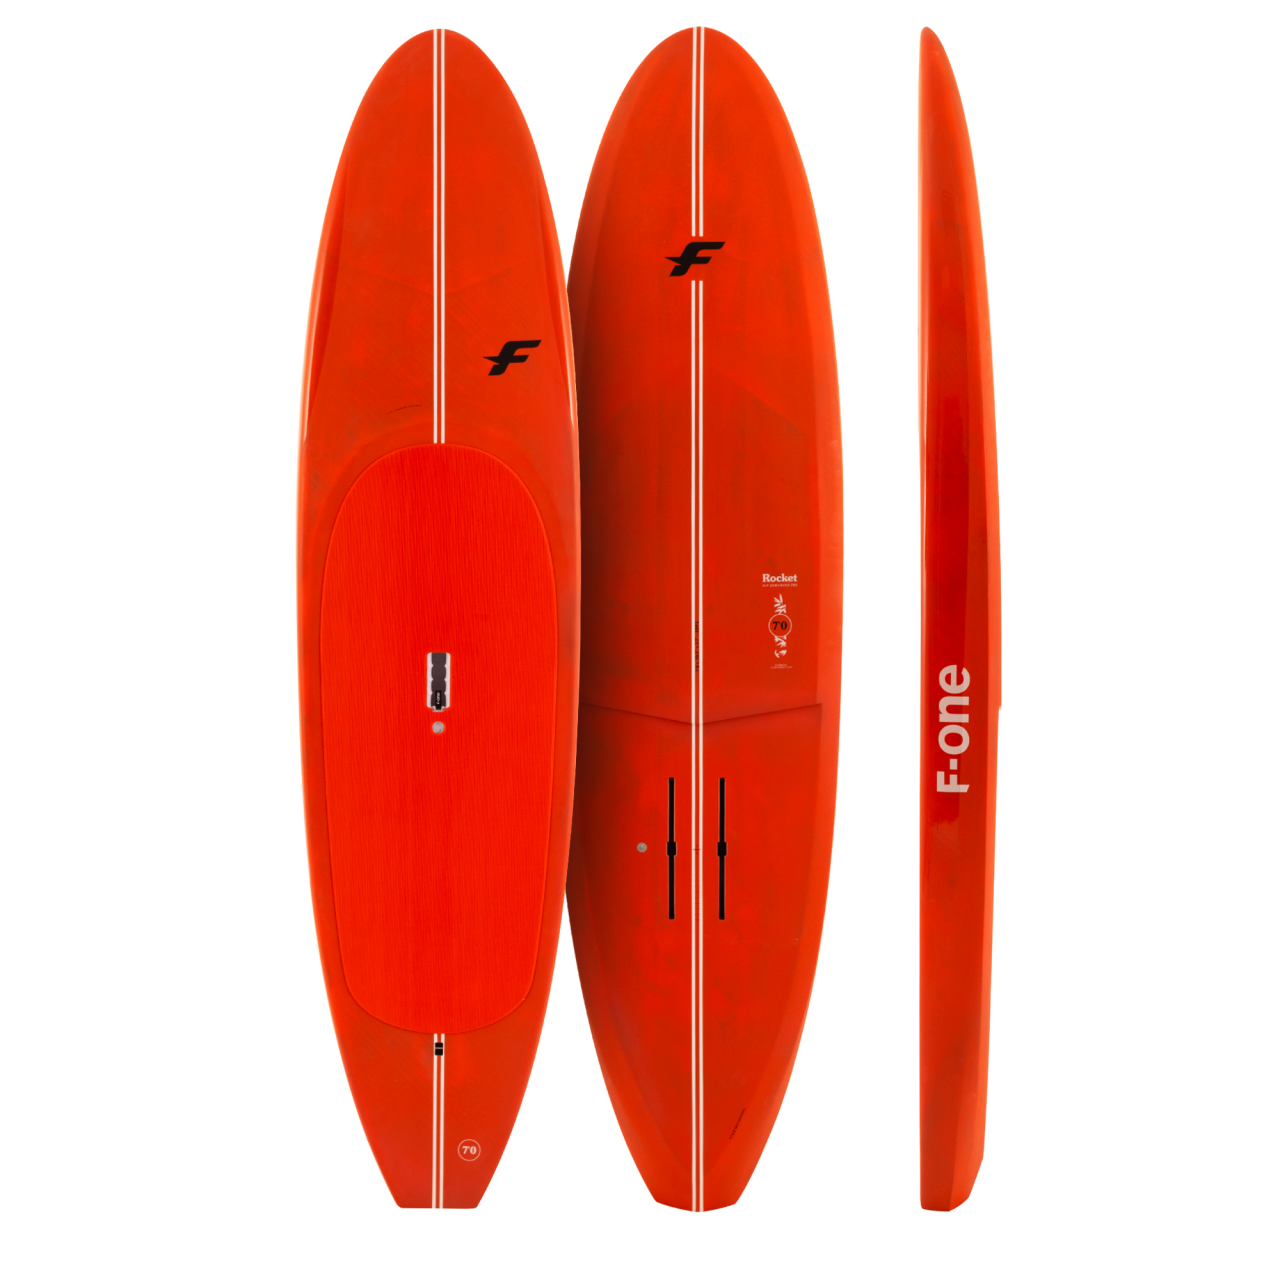 F-One Rocket Sup DW Pro Bamboo 19"